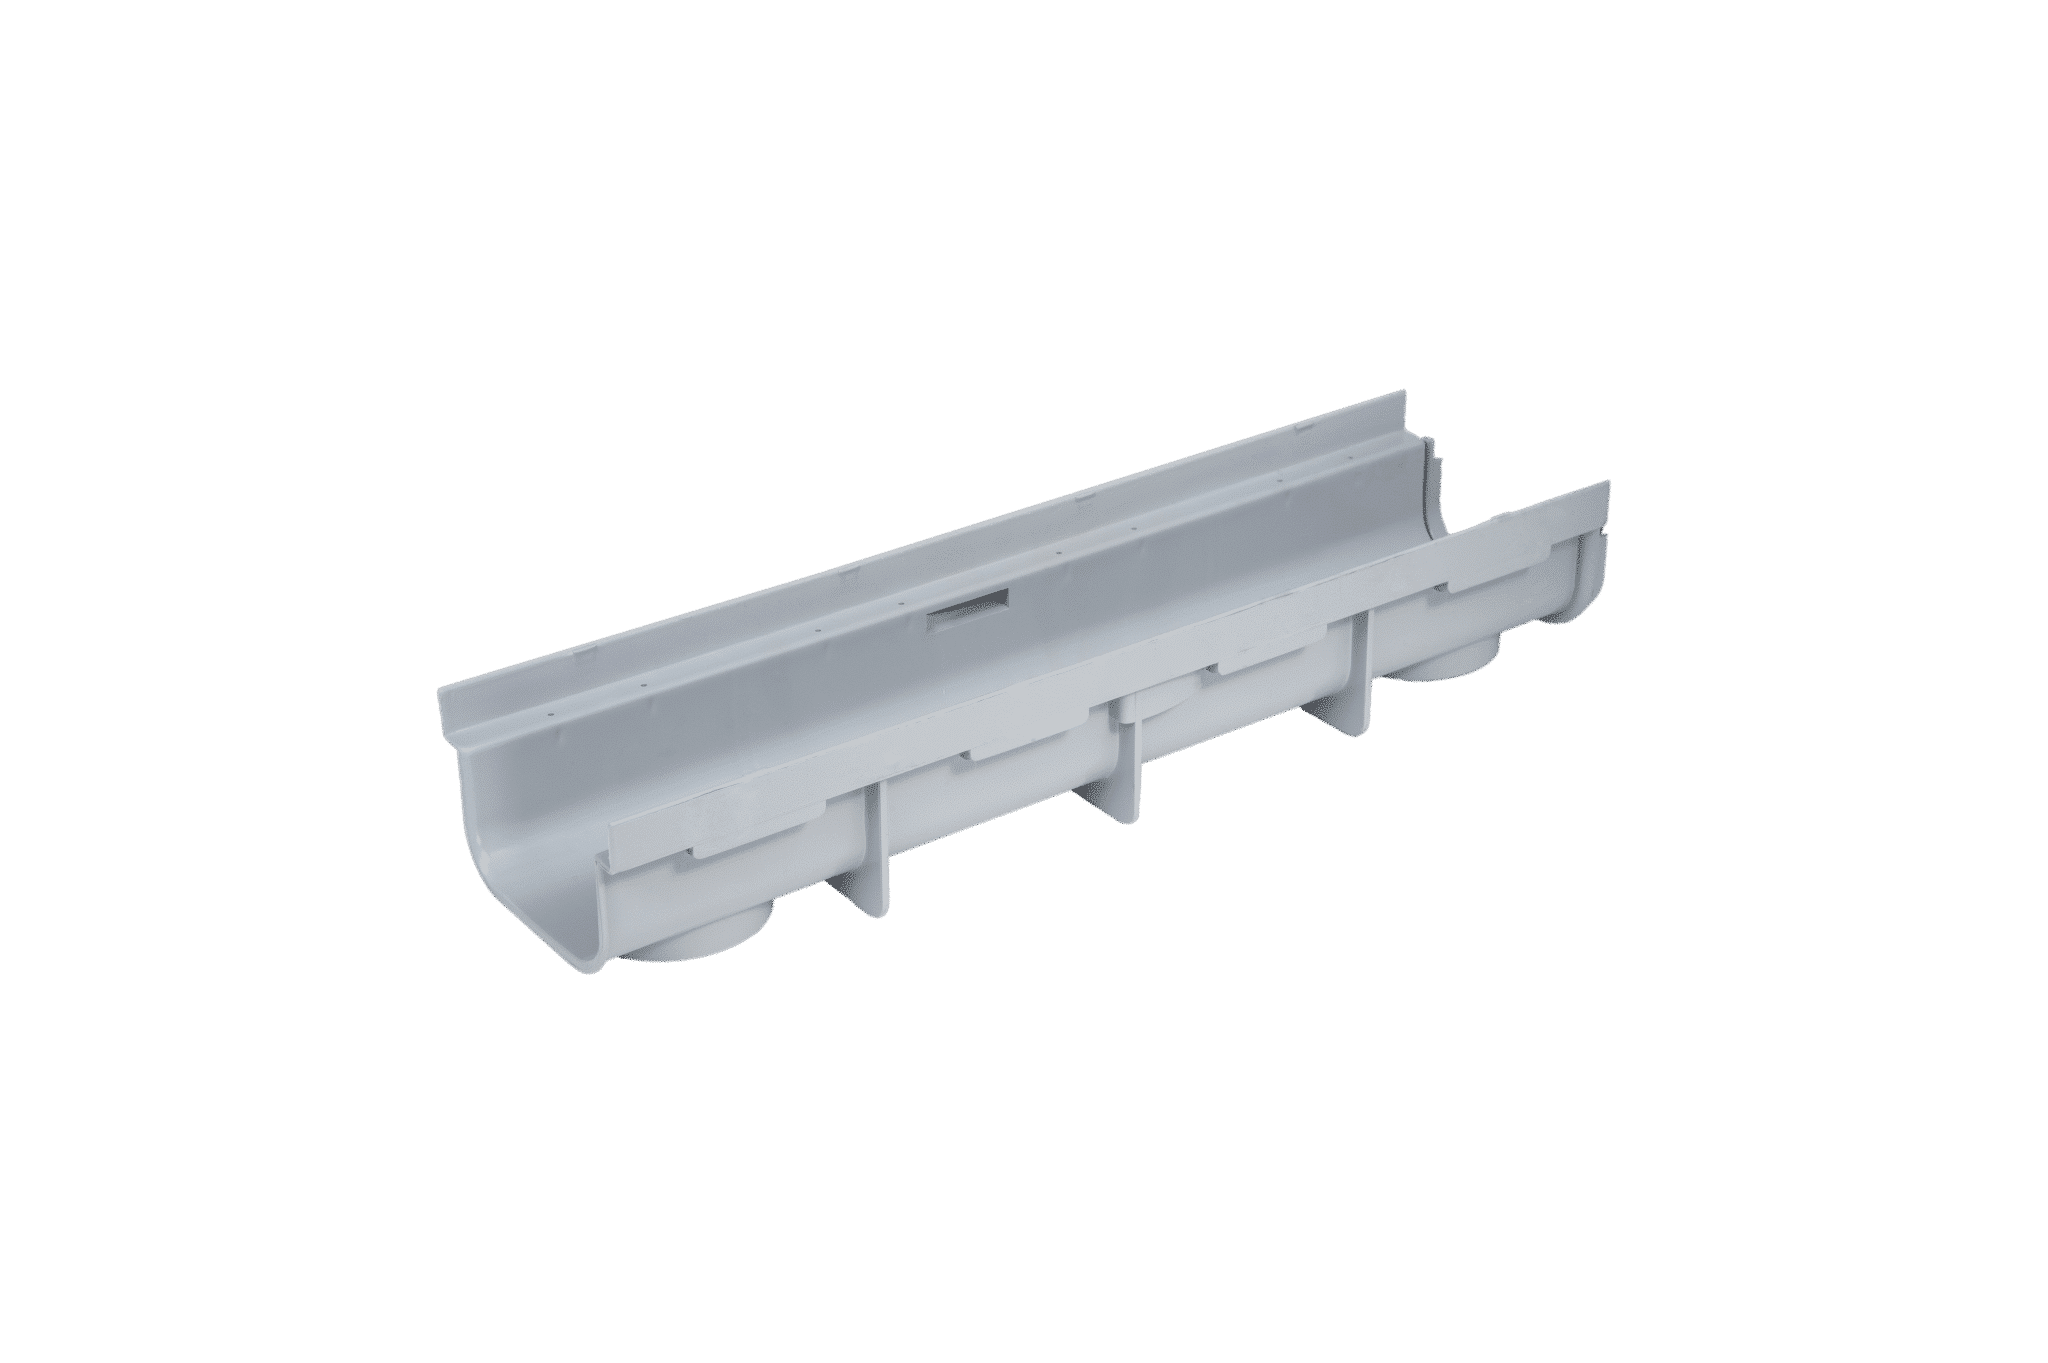 Slot drainage channels for plastic and metalic grids